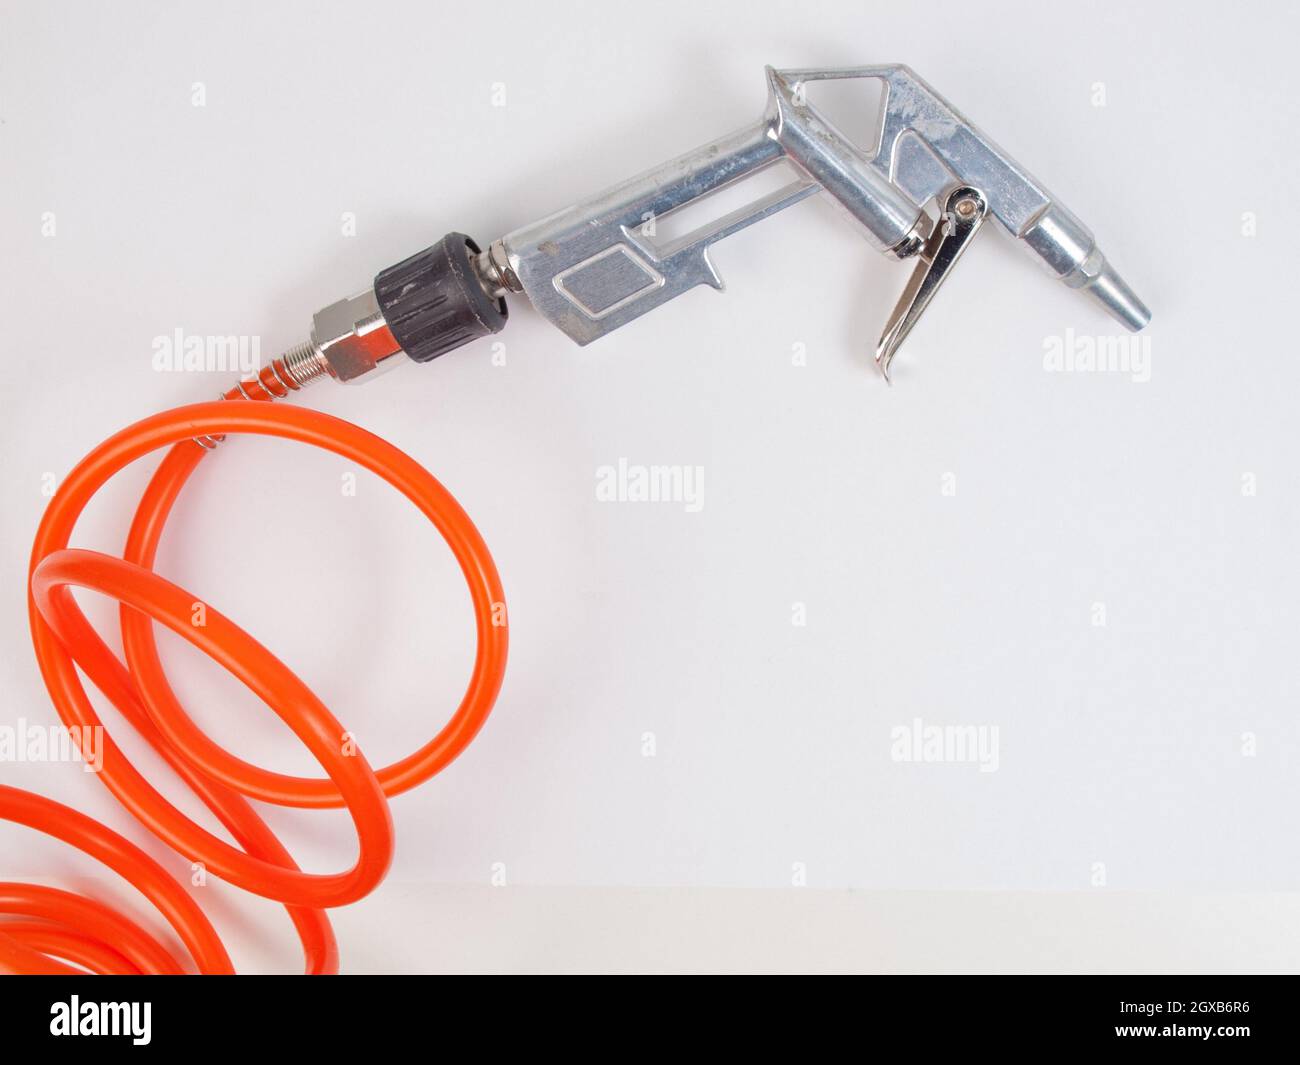 Detail of air compressor hose and pistol. Stock Photo